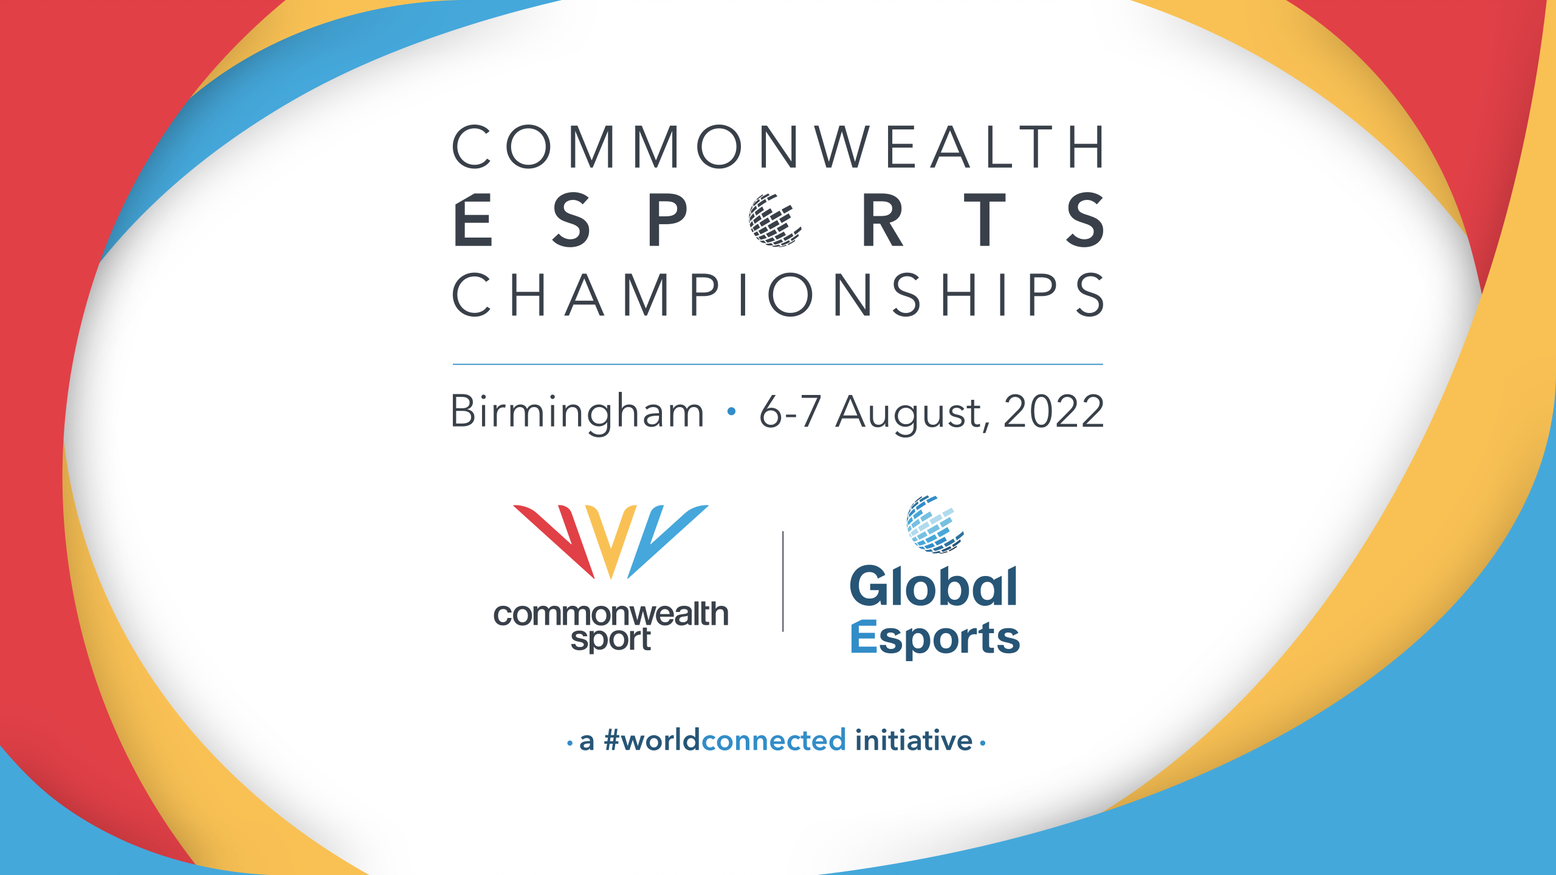 Commonwealth Esports Forum and Championships set to make historic opening in Birmingham